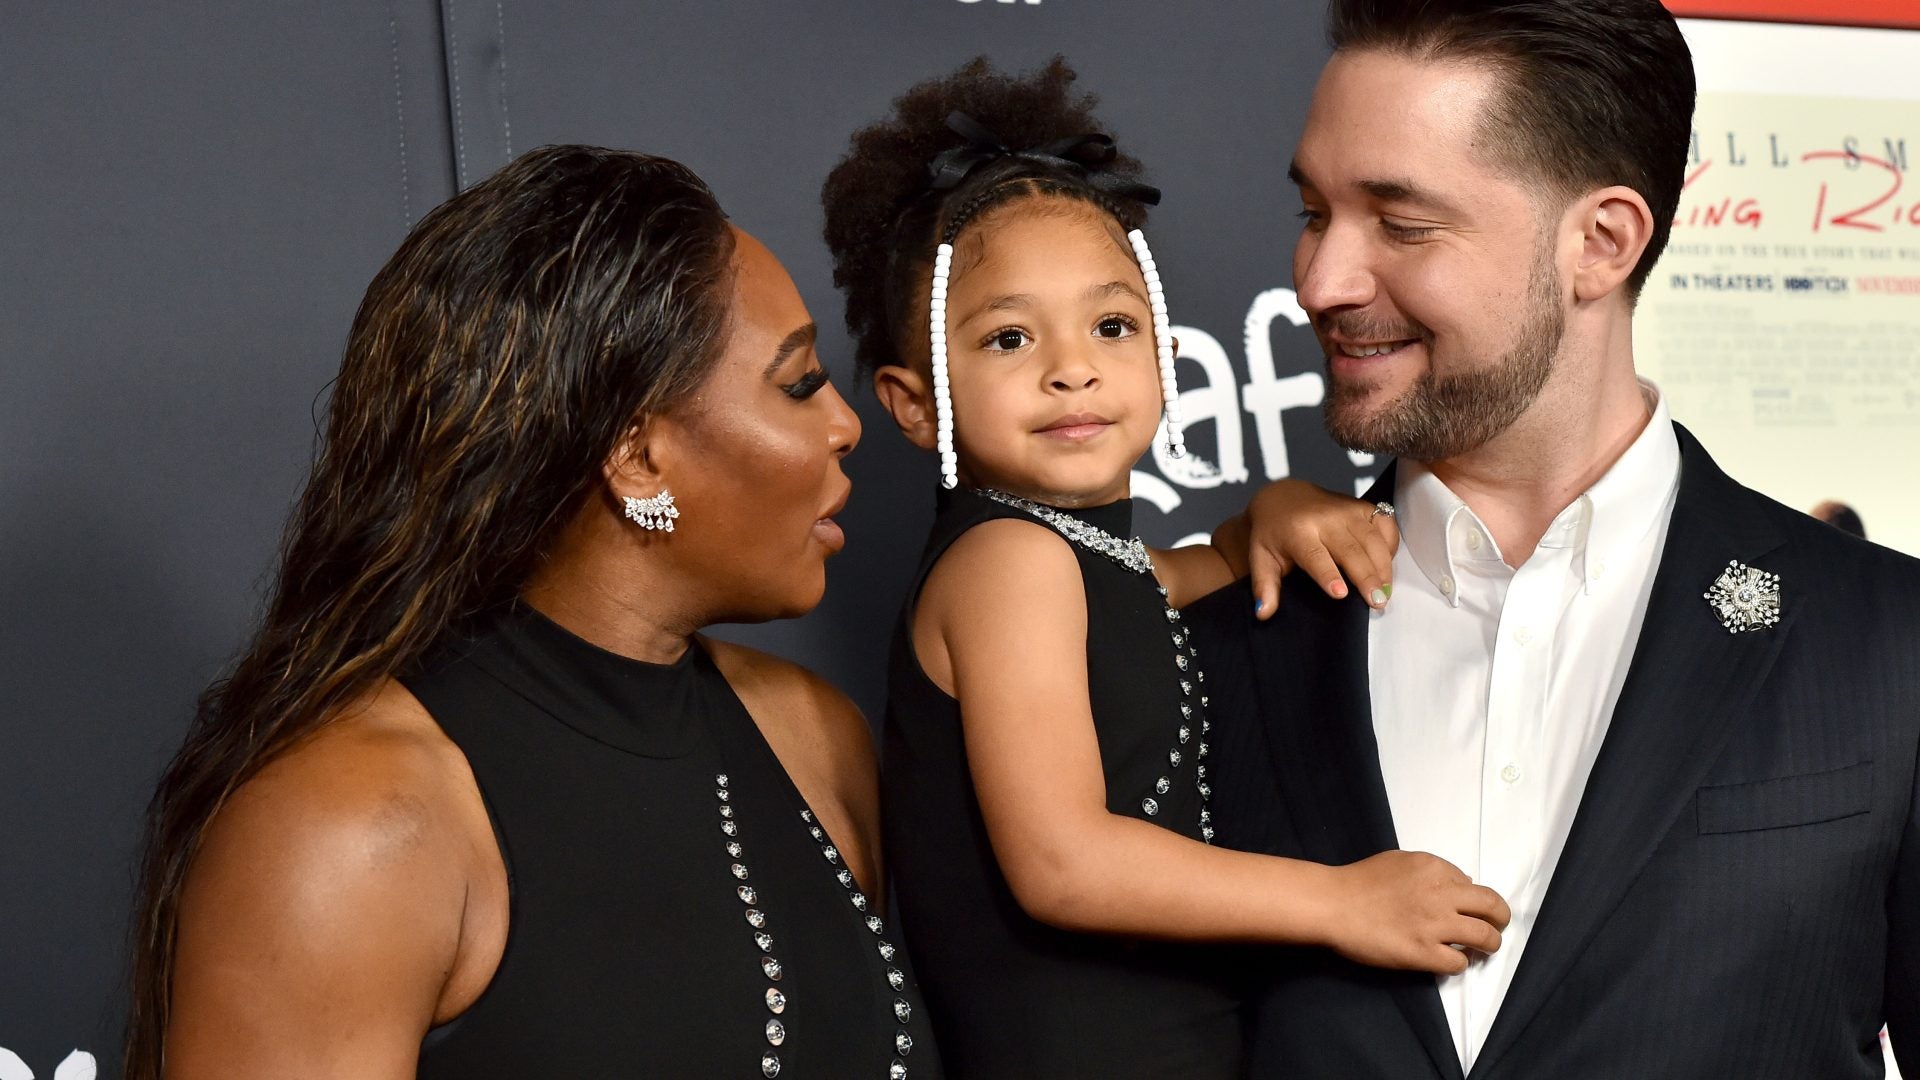 Move Over Mama! Serena Williams' 4-Year-Old Daughter Is Already A Force To Be Reckoned With On The Tennis Court